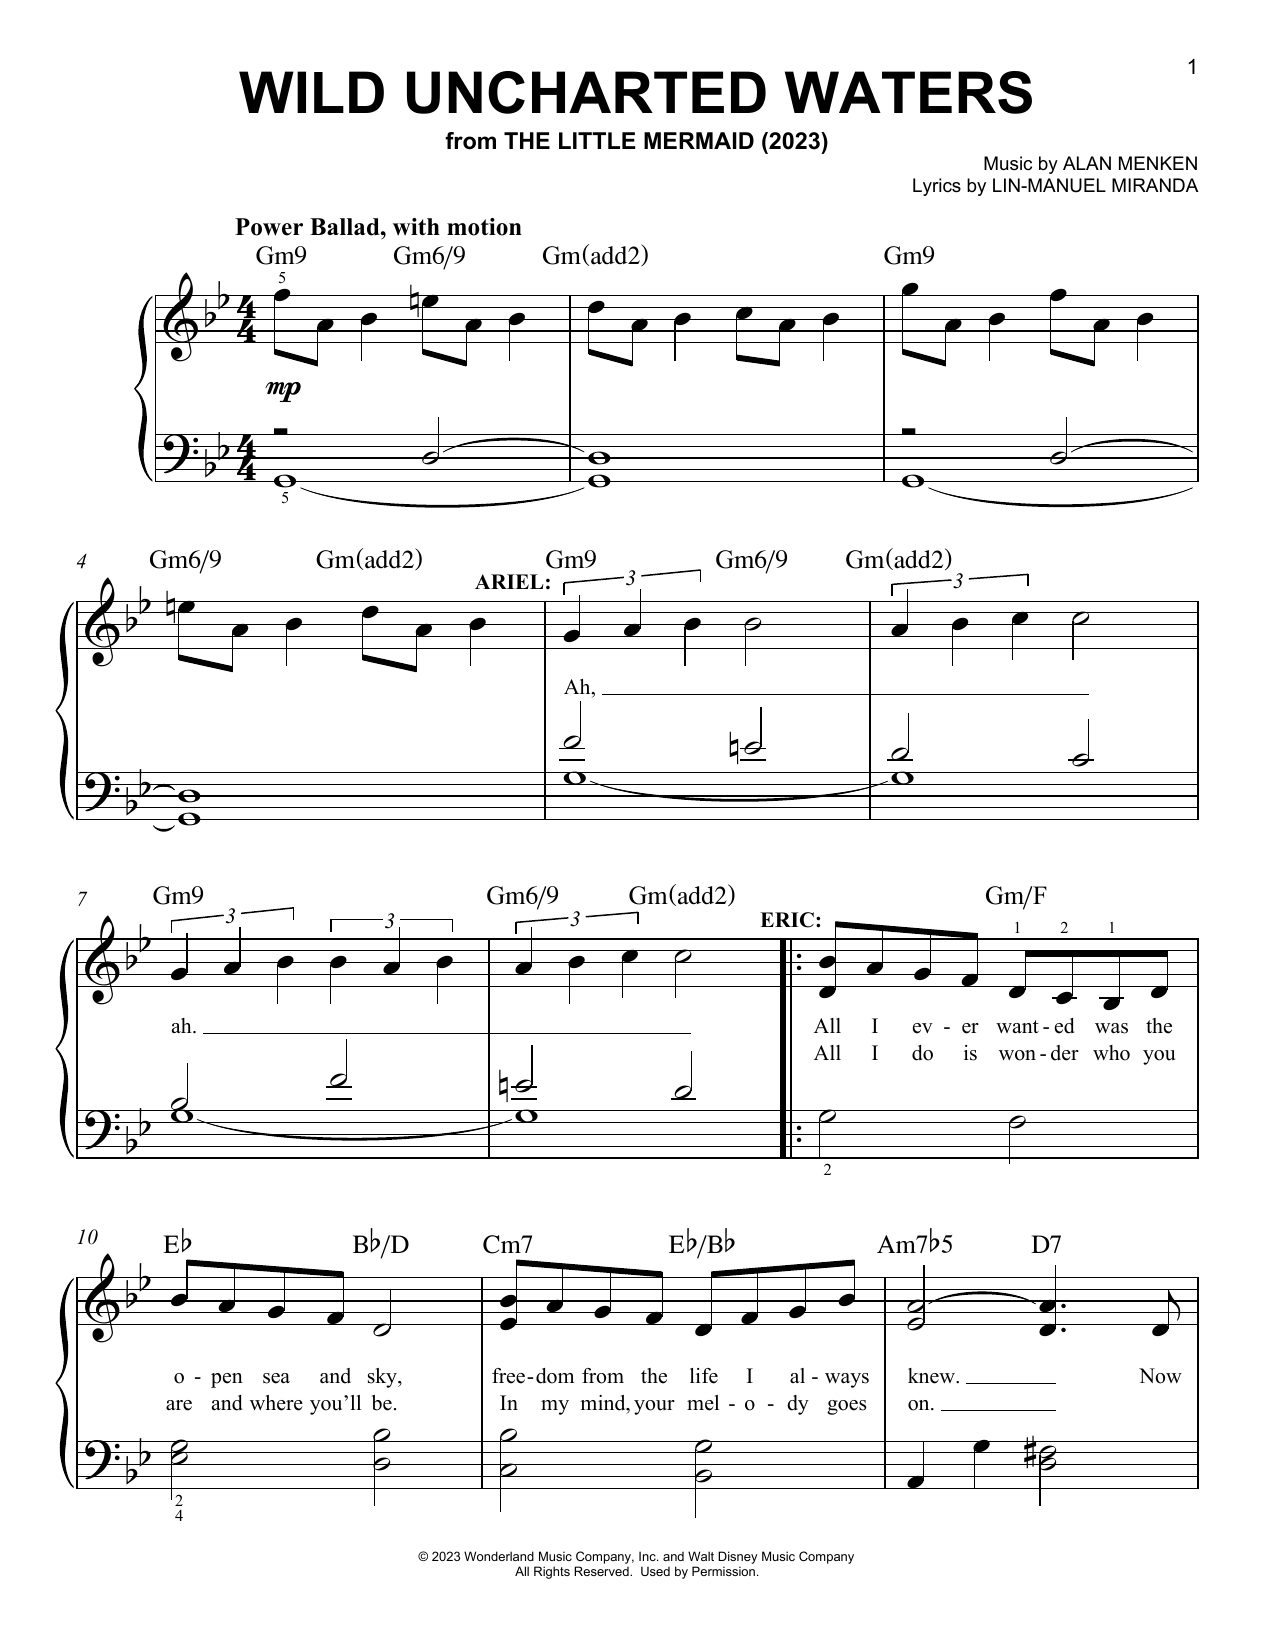 Download Jonah Hauer-King Wild Uncharted Waters (from The Little Sheet Music